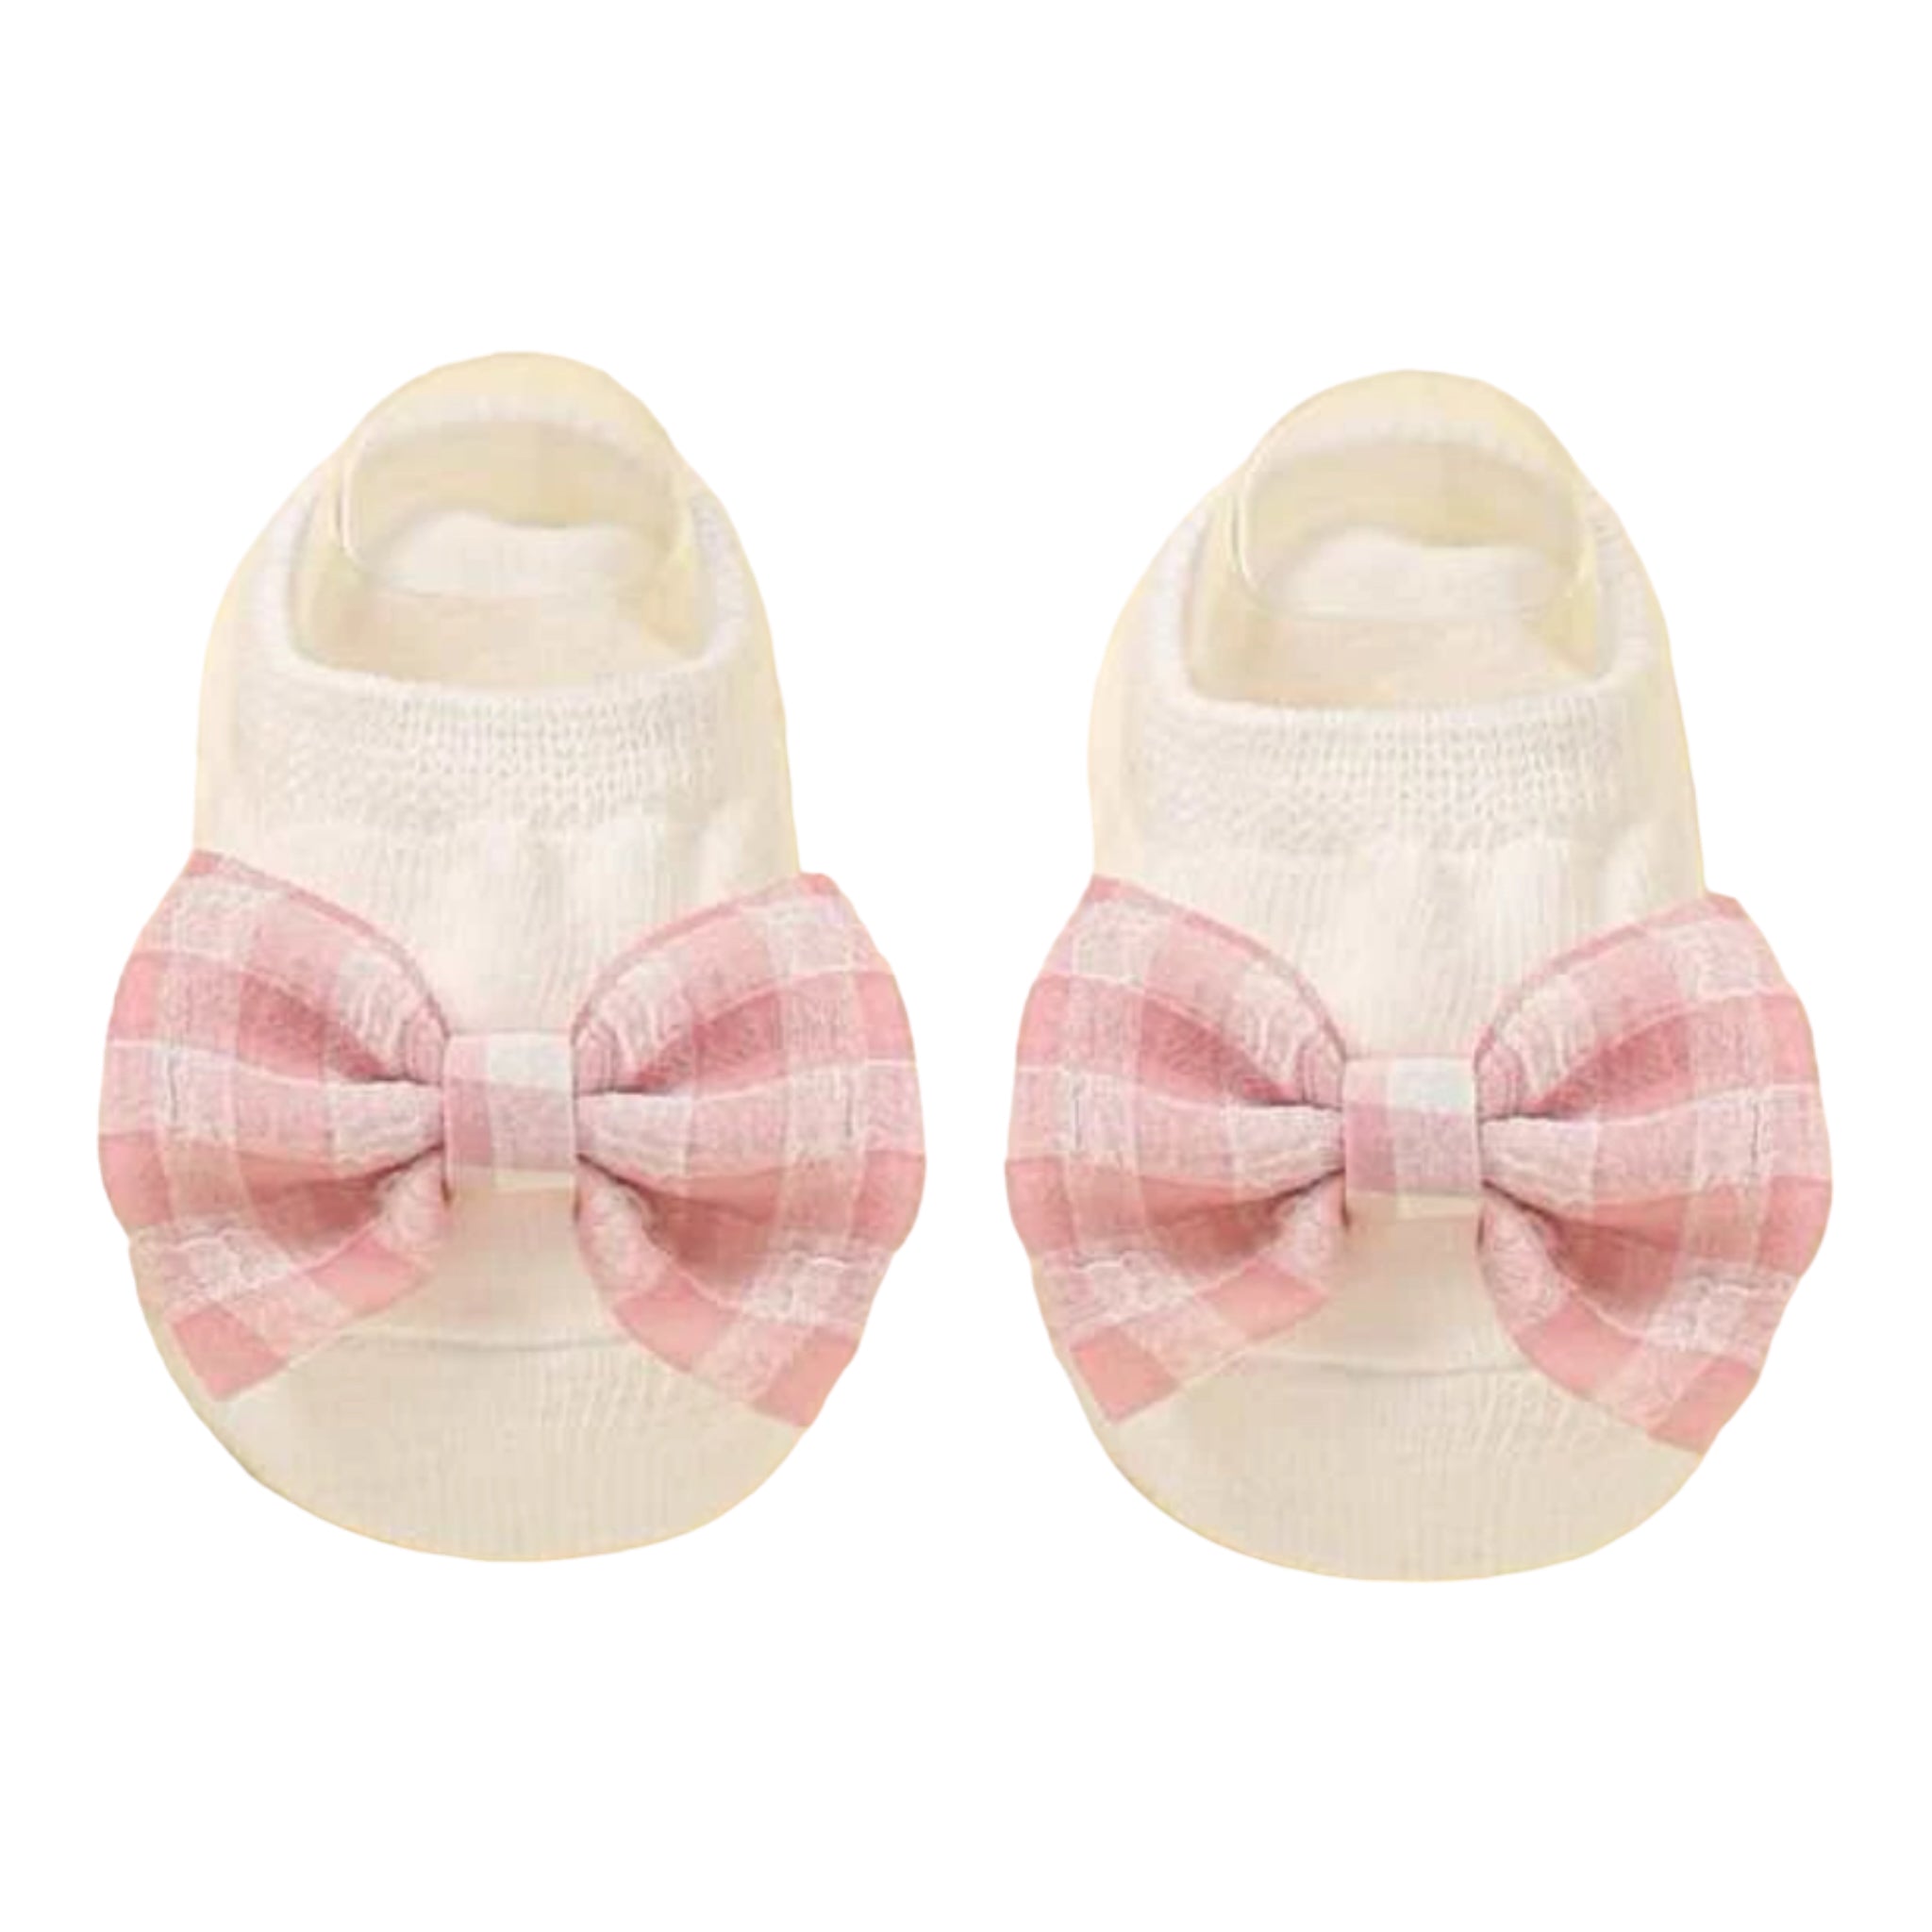 Baby Newborn Bow Socks | Checkered, shop the best Christmas gift gifts for her for him from Inna carton online store dubai, UAE!